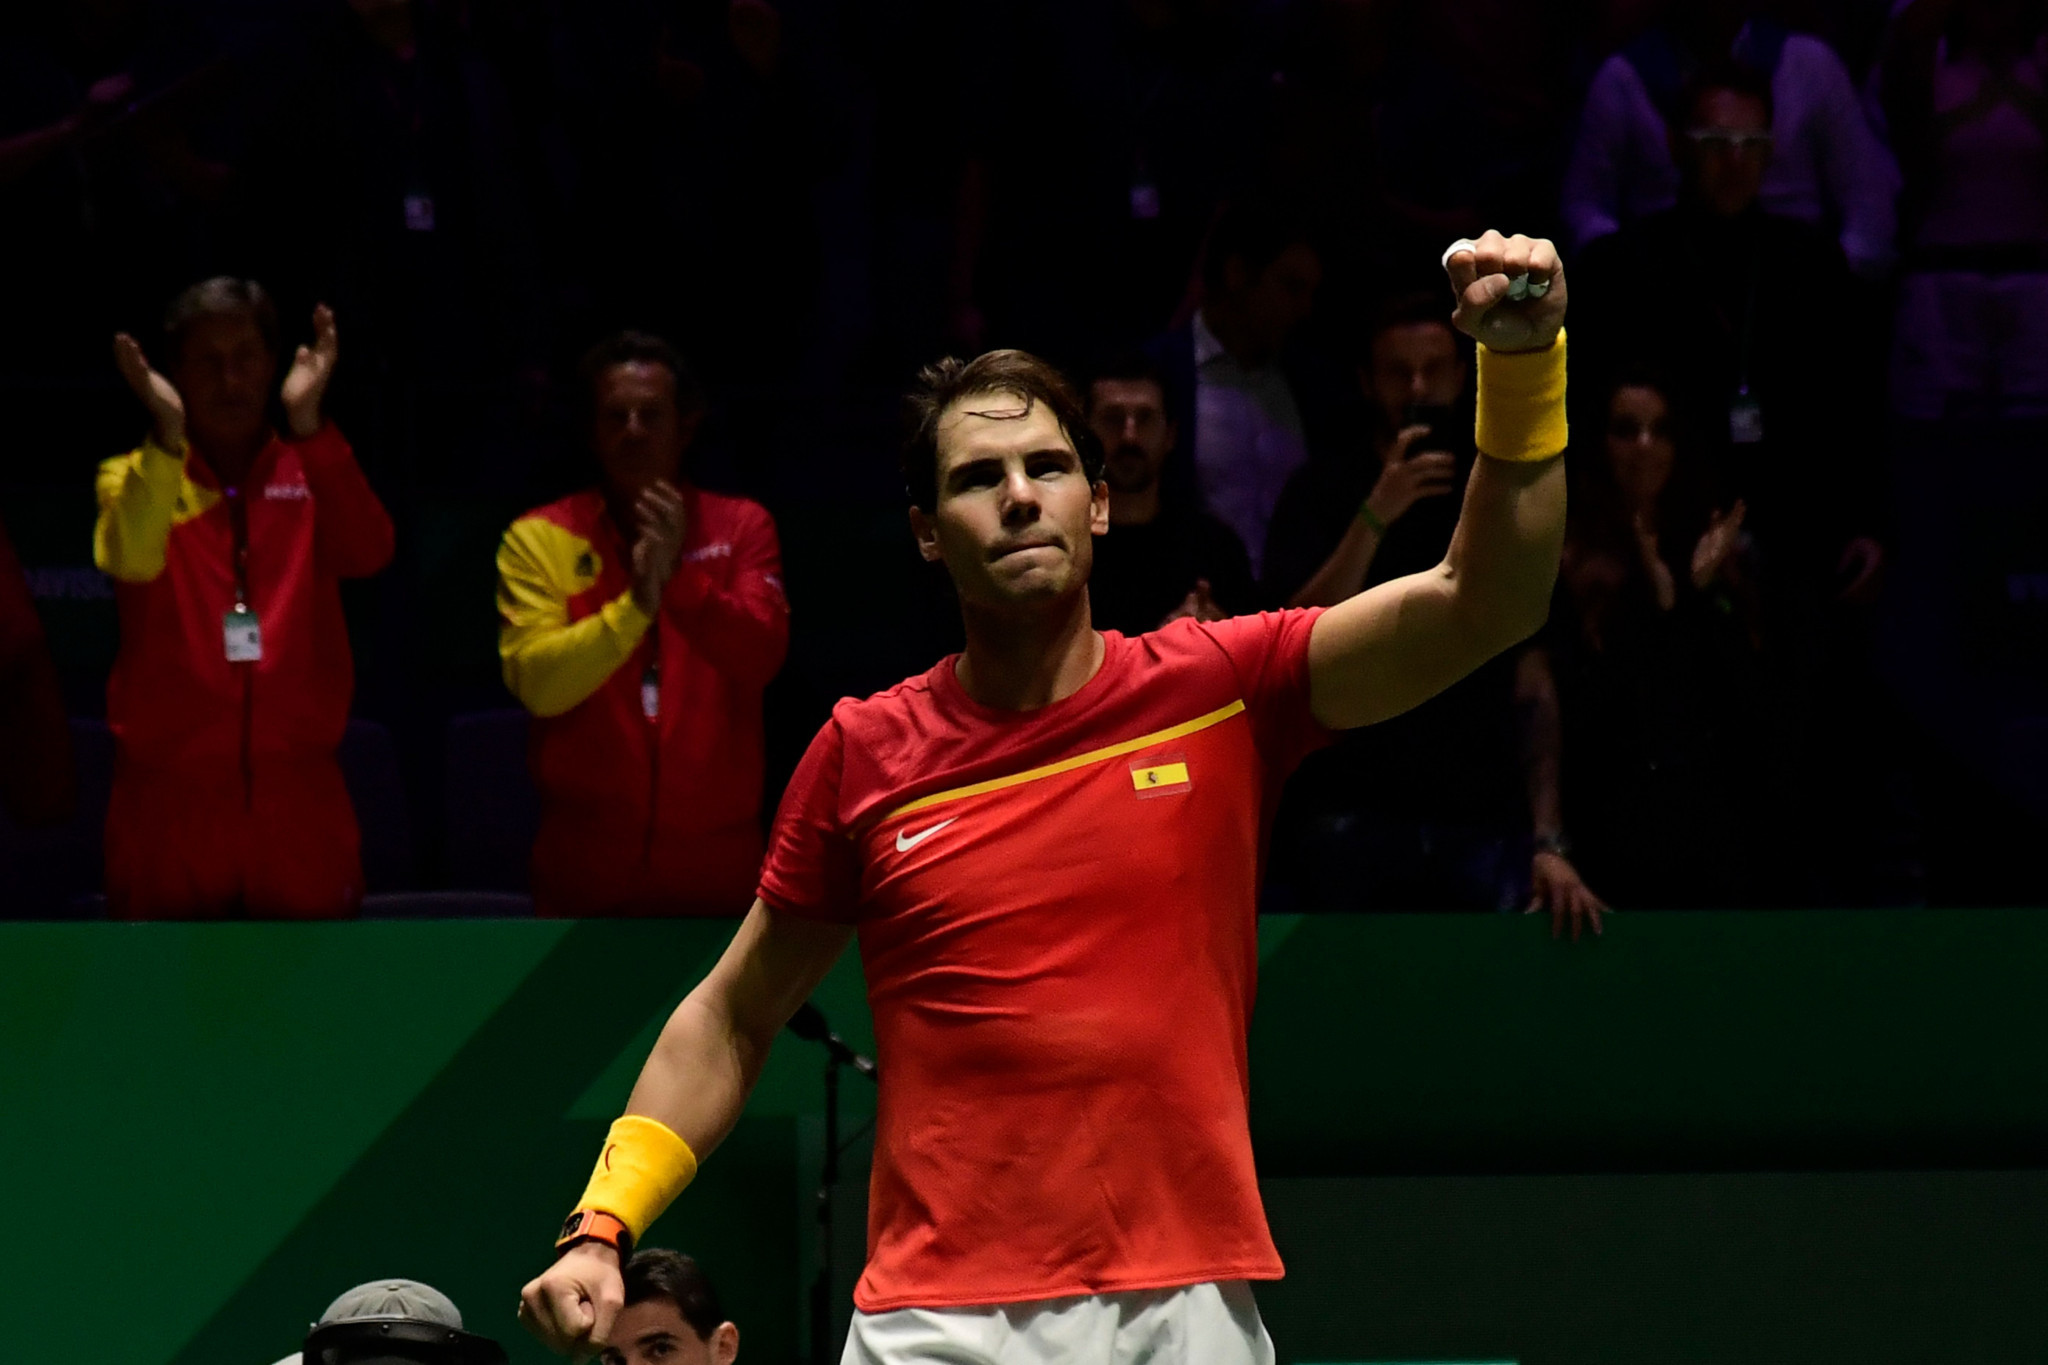 Rafael Nadal maintained his superb Davis Cup record with victory over Croatia's Borna Gojo ©Getty Images